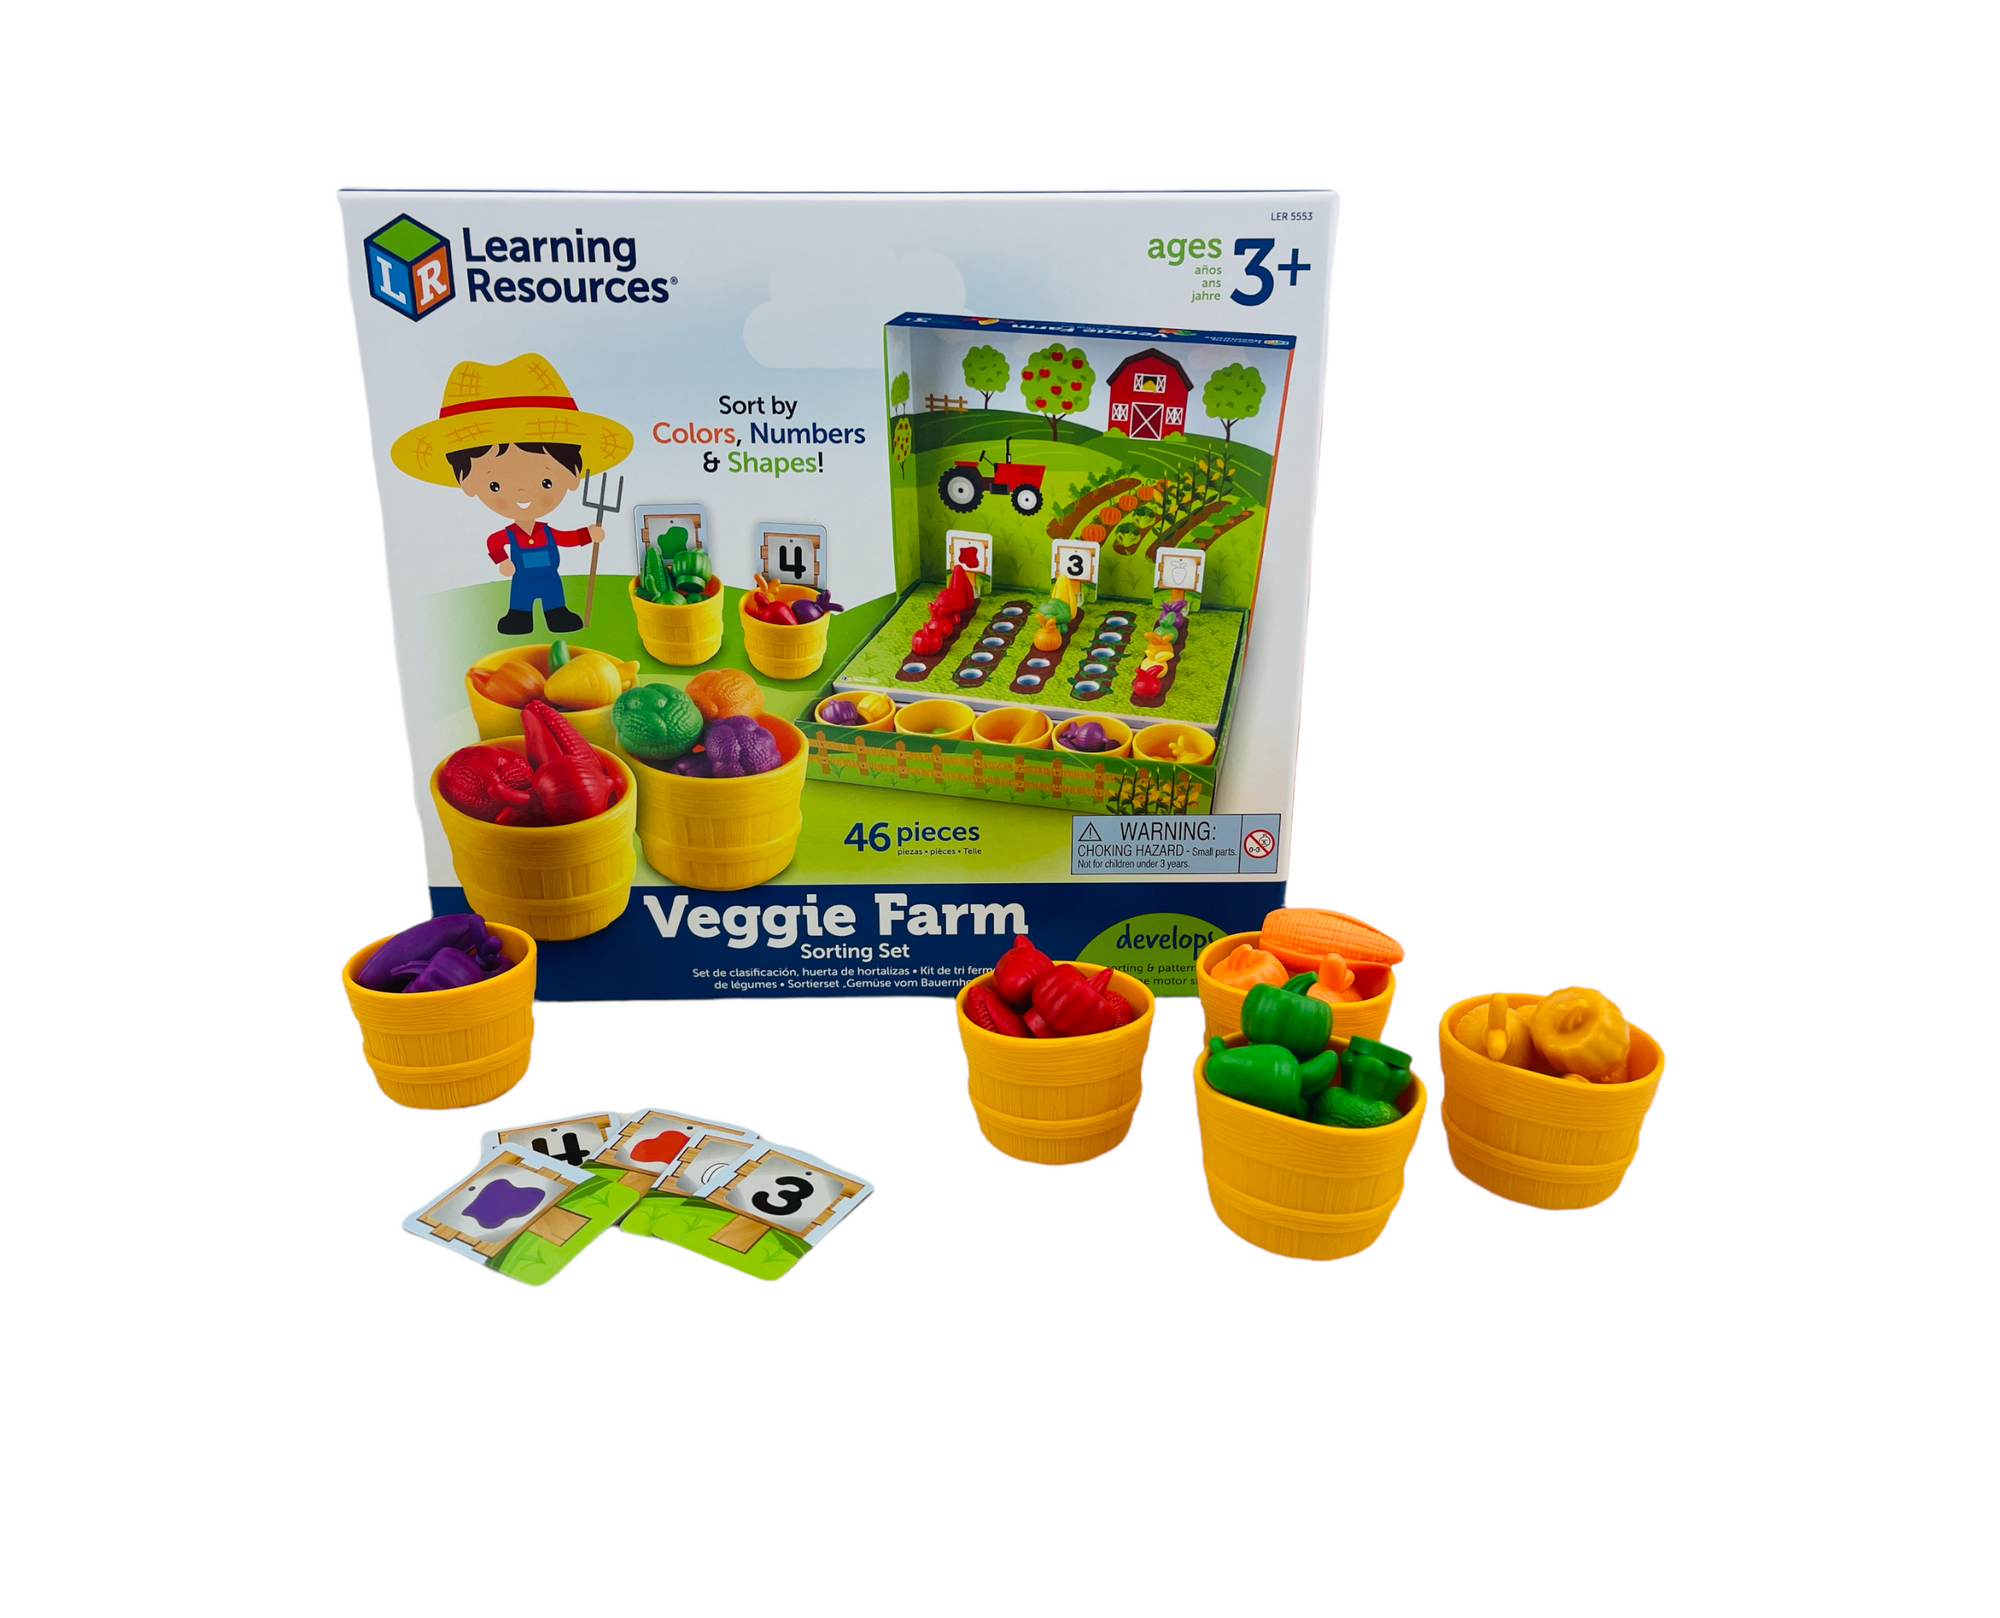 Learning Resources Veggie Farm Sorting Set on display with pieces from the set in front of box